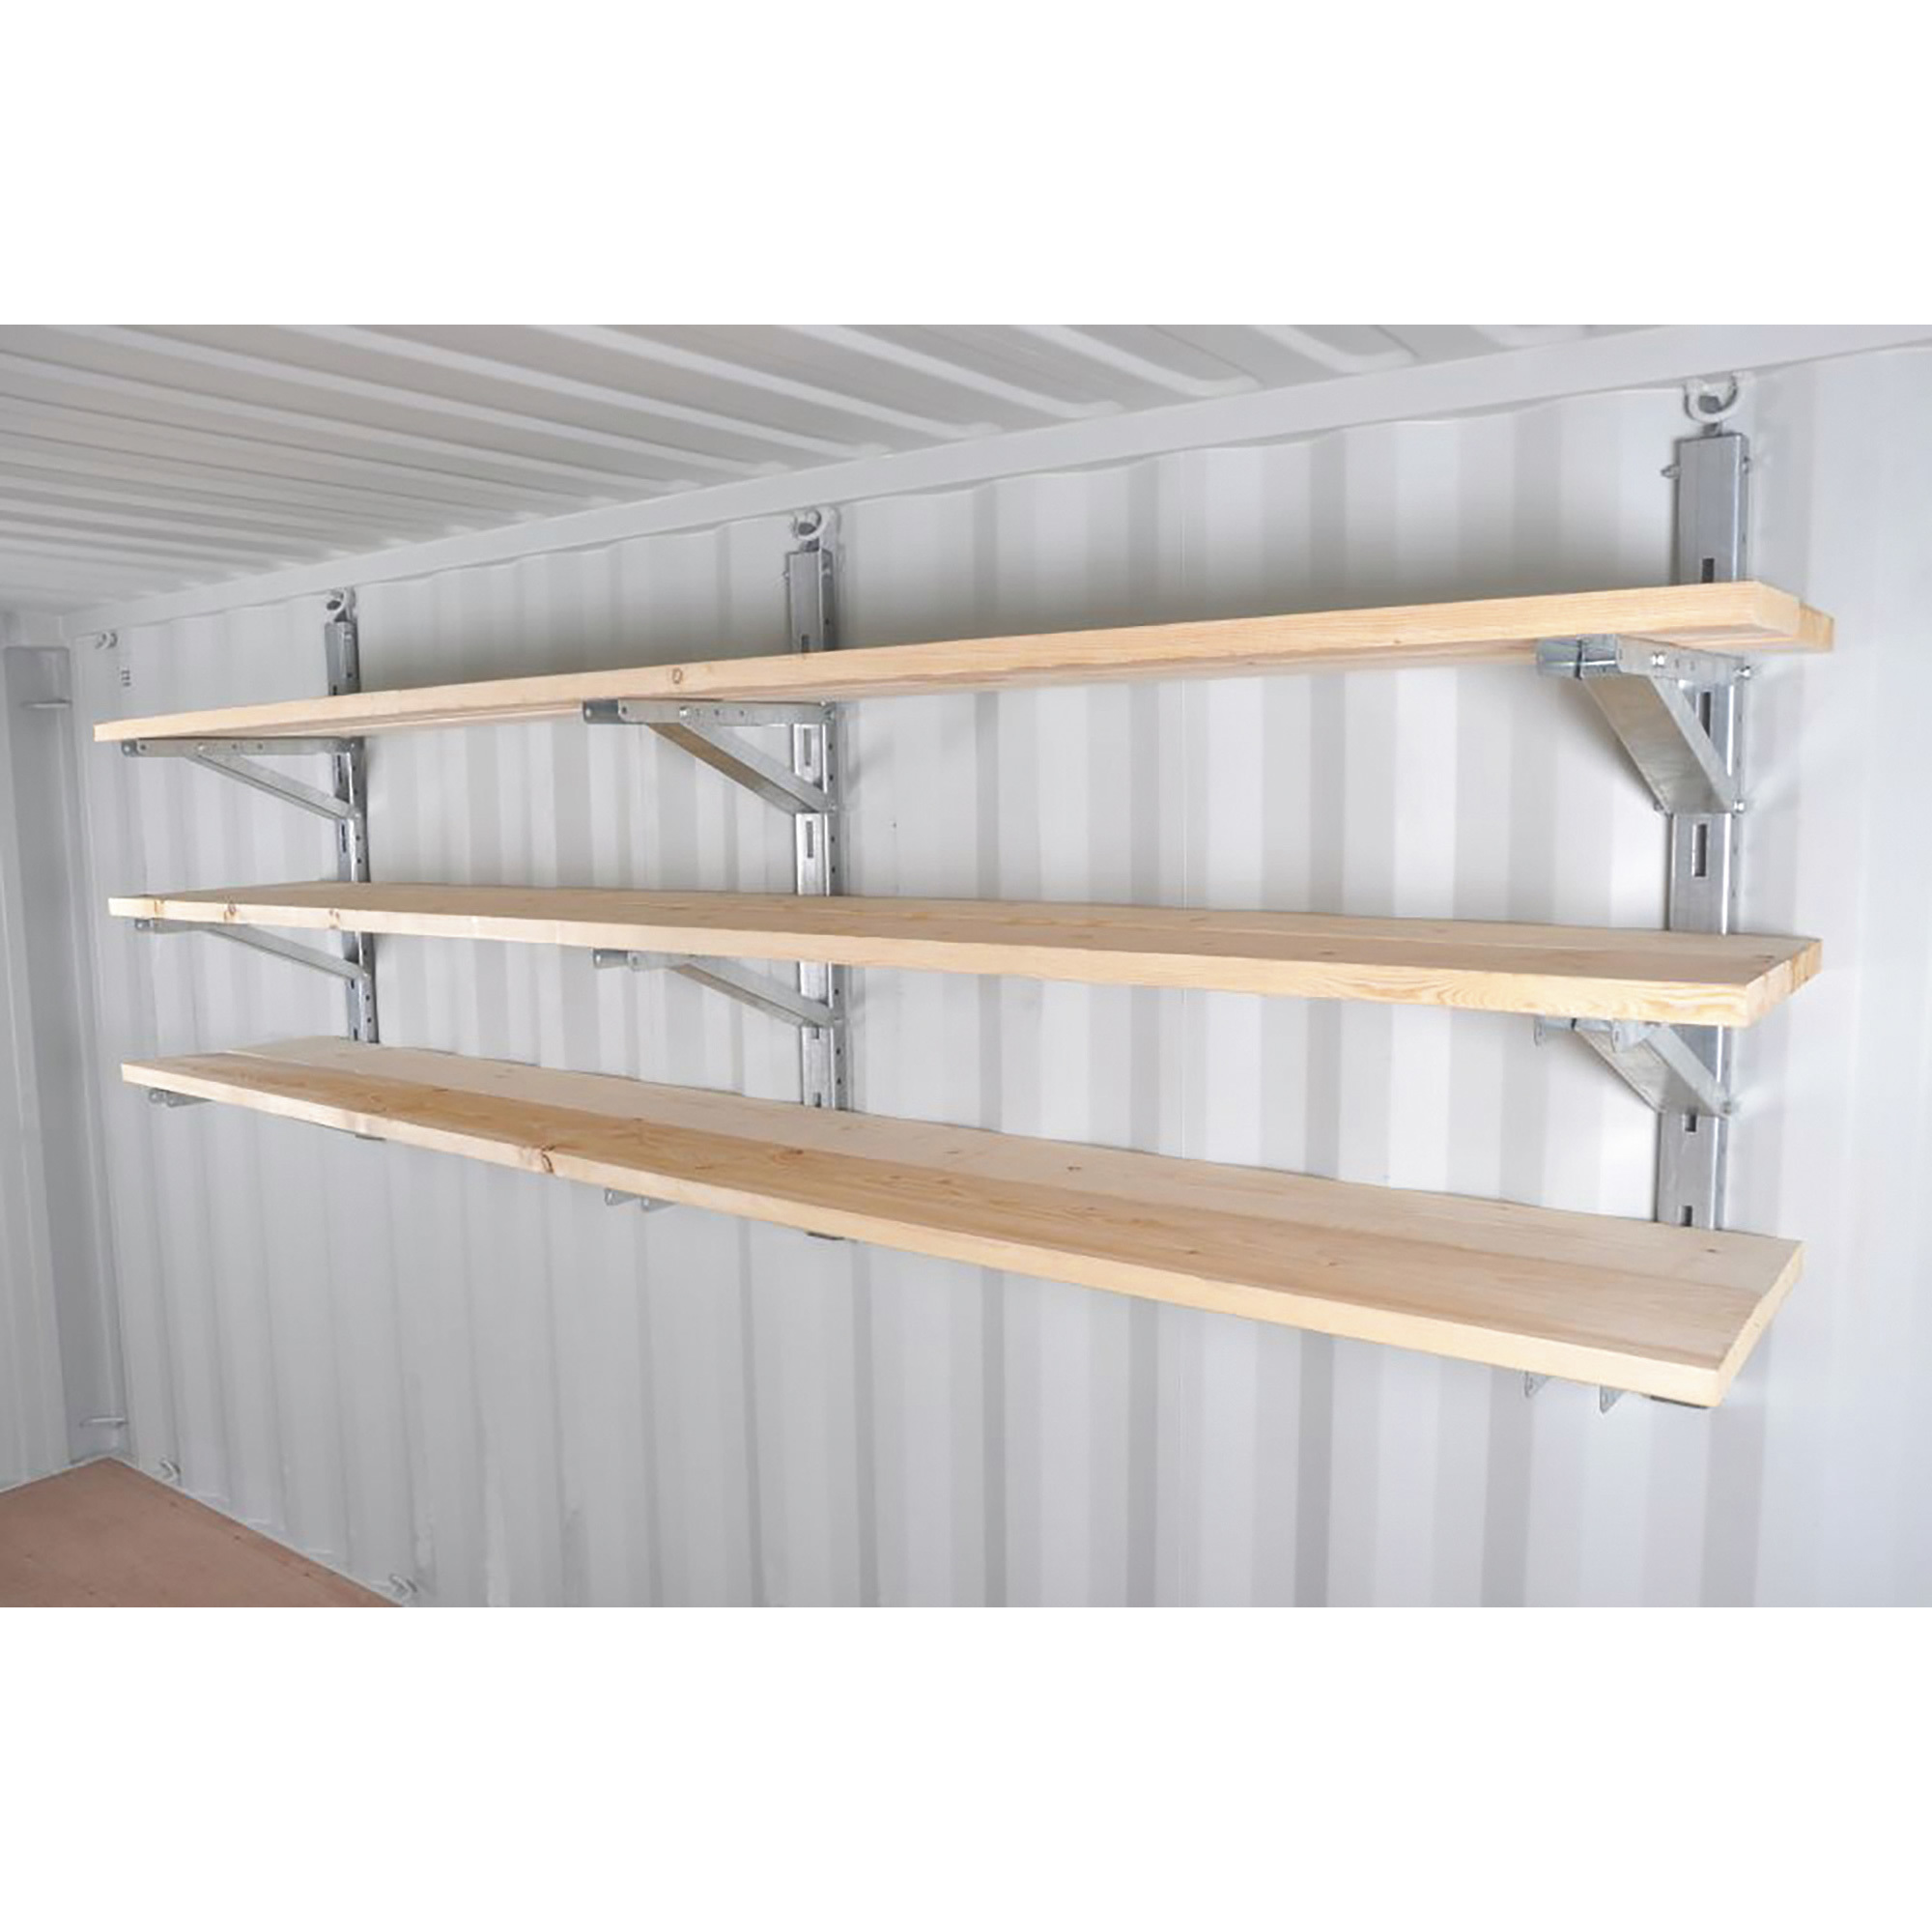 Western Steel & Tube Container Shelving Kit â 3 Level, Model 1410